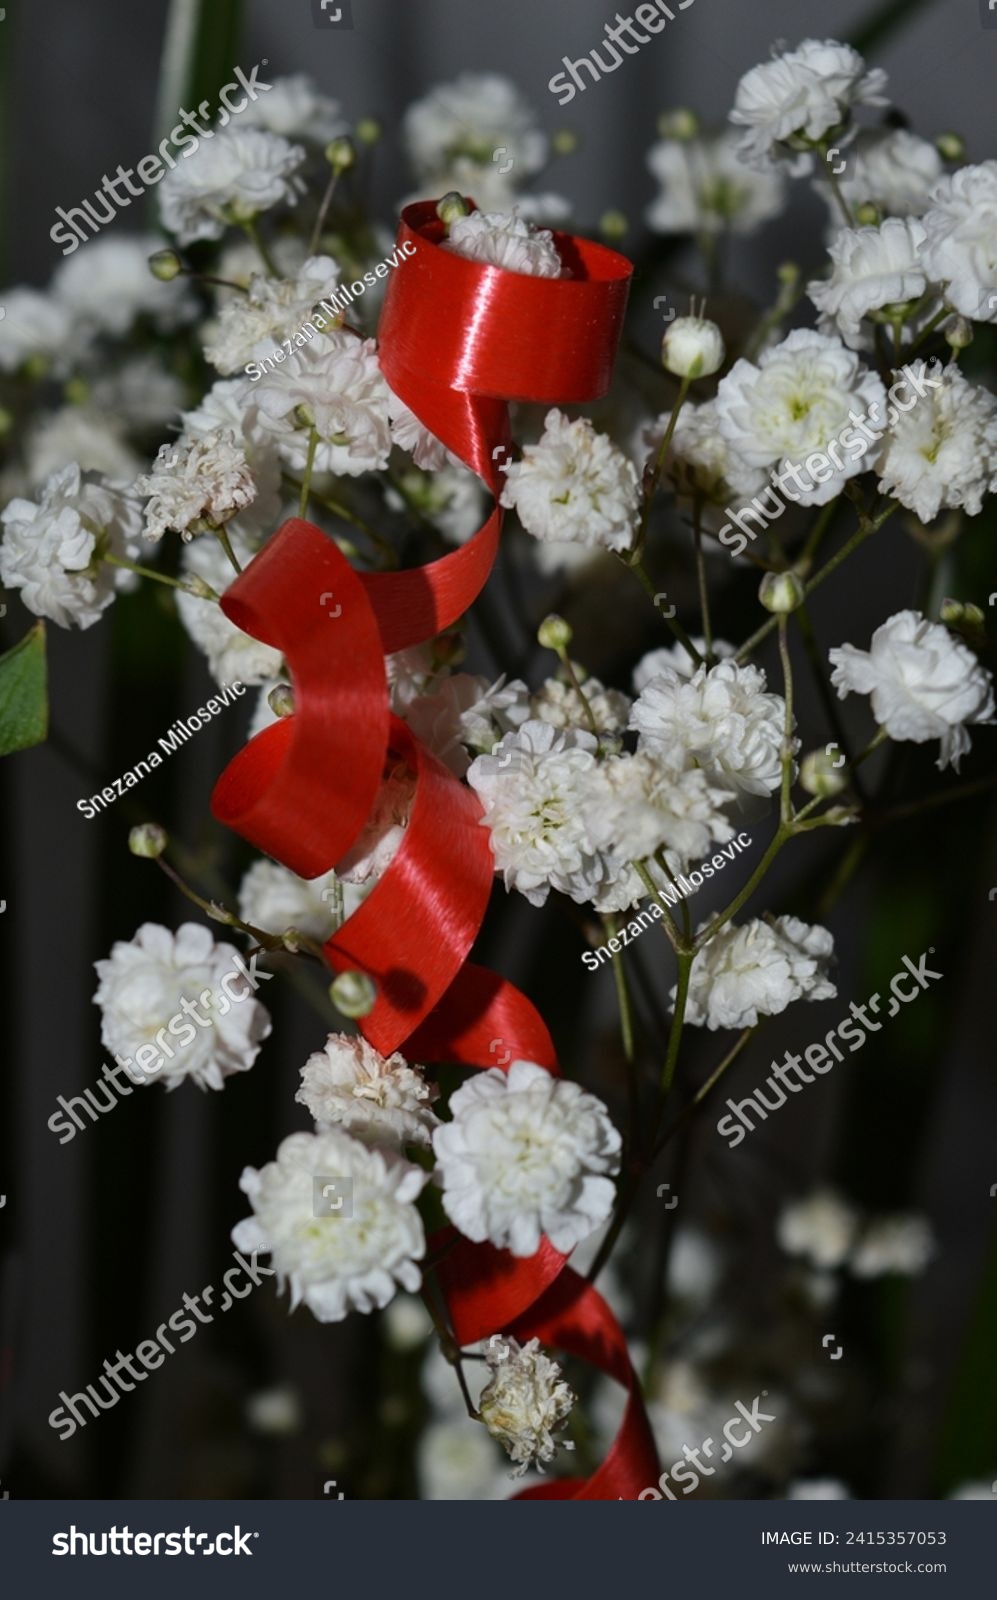 Small white flowers as decoration in bouquets, isolated. Red decorative tape. A close-up shot. #2415357053